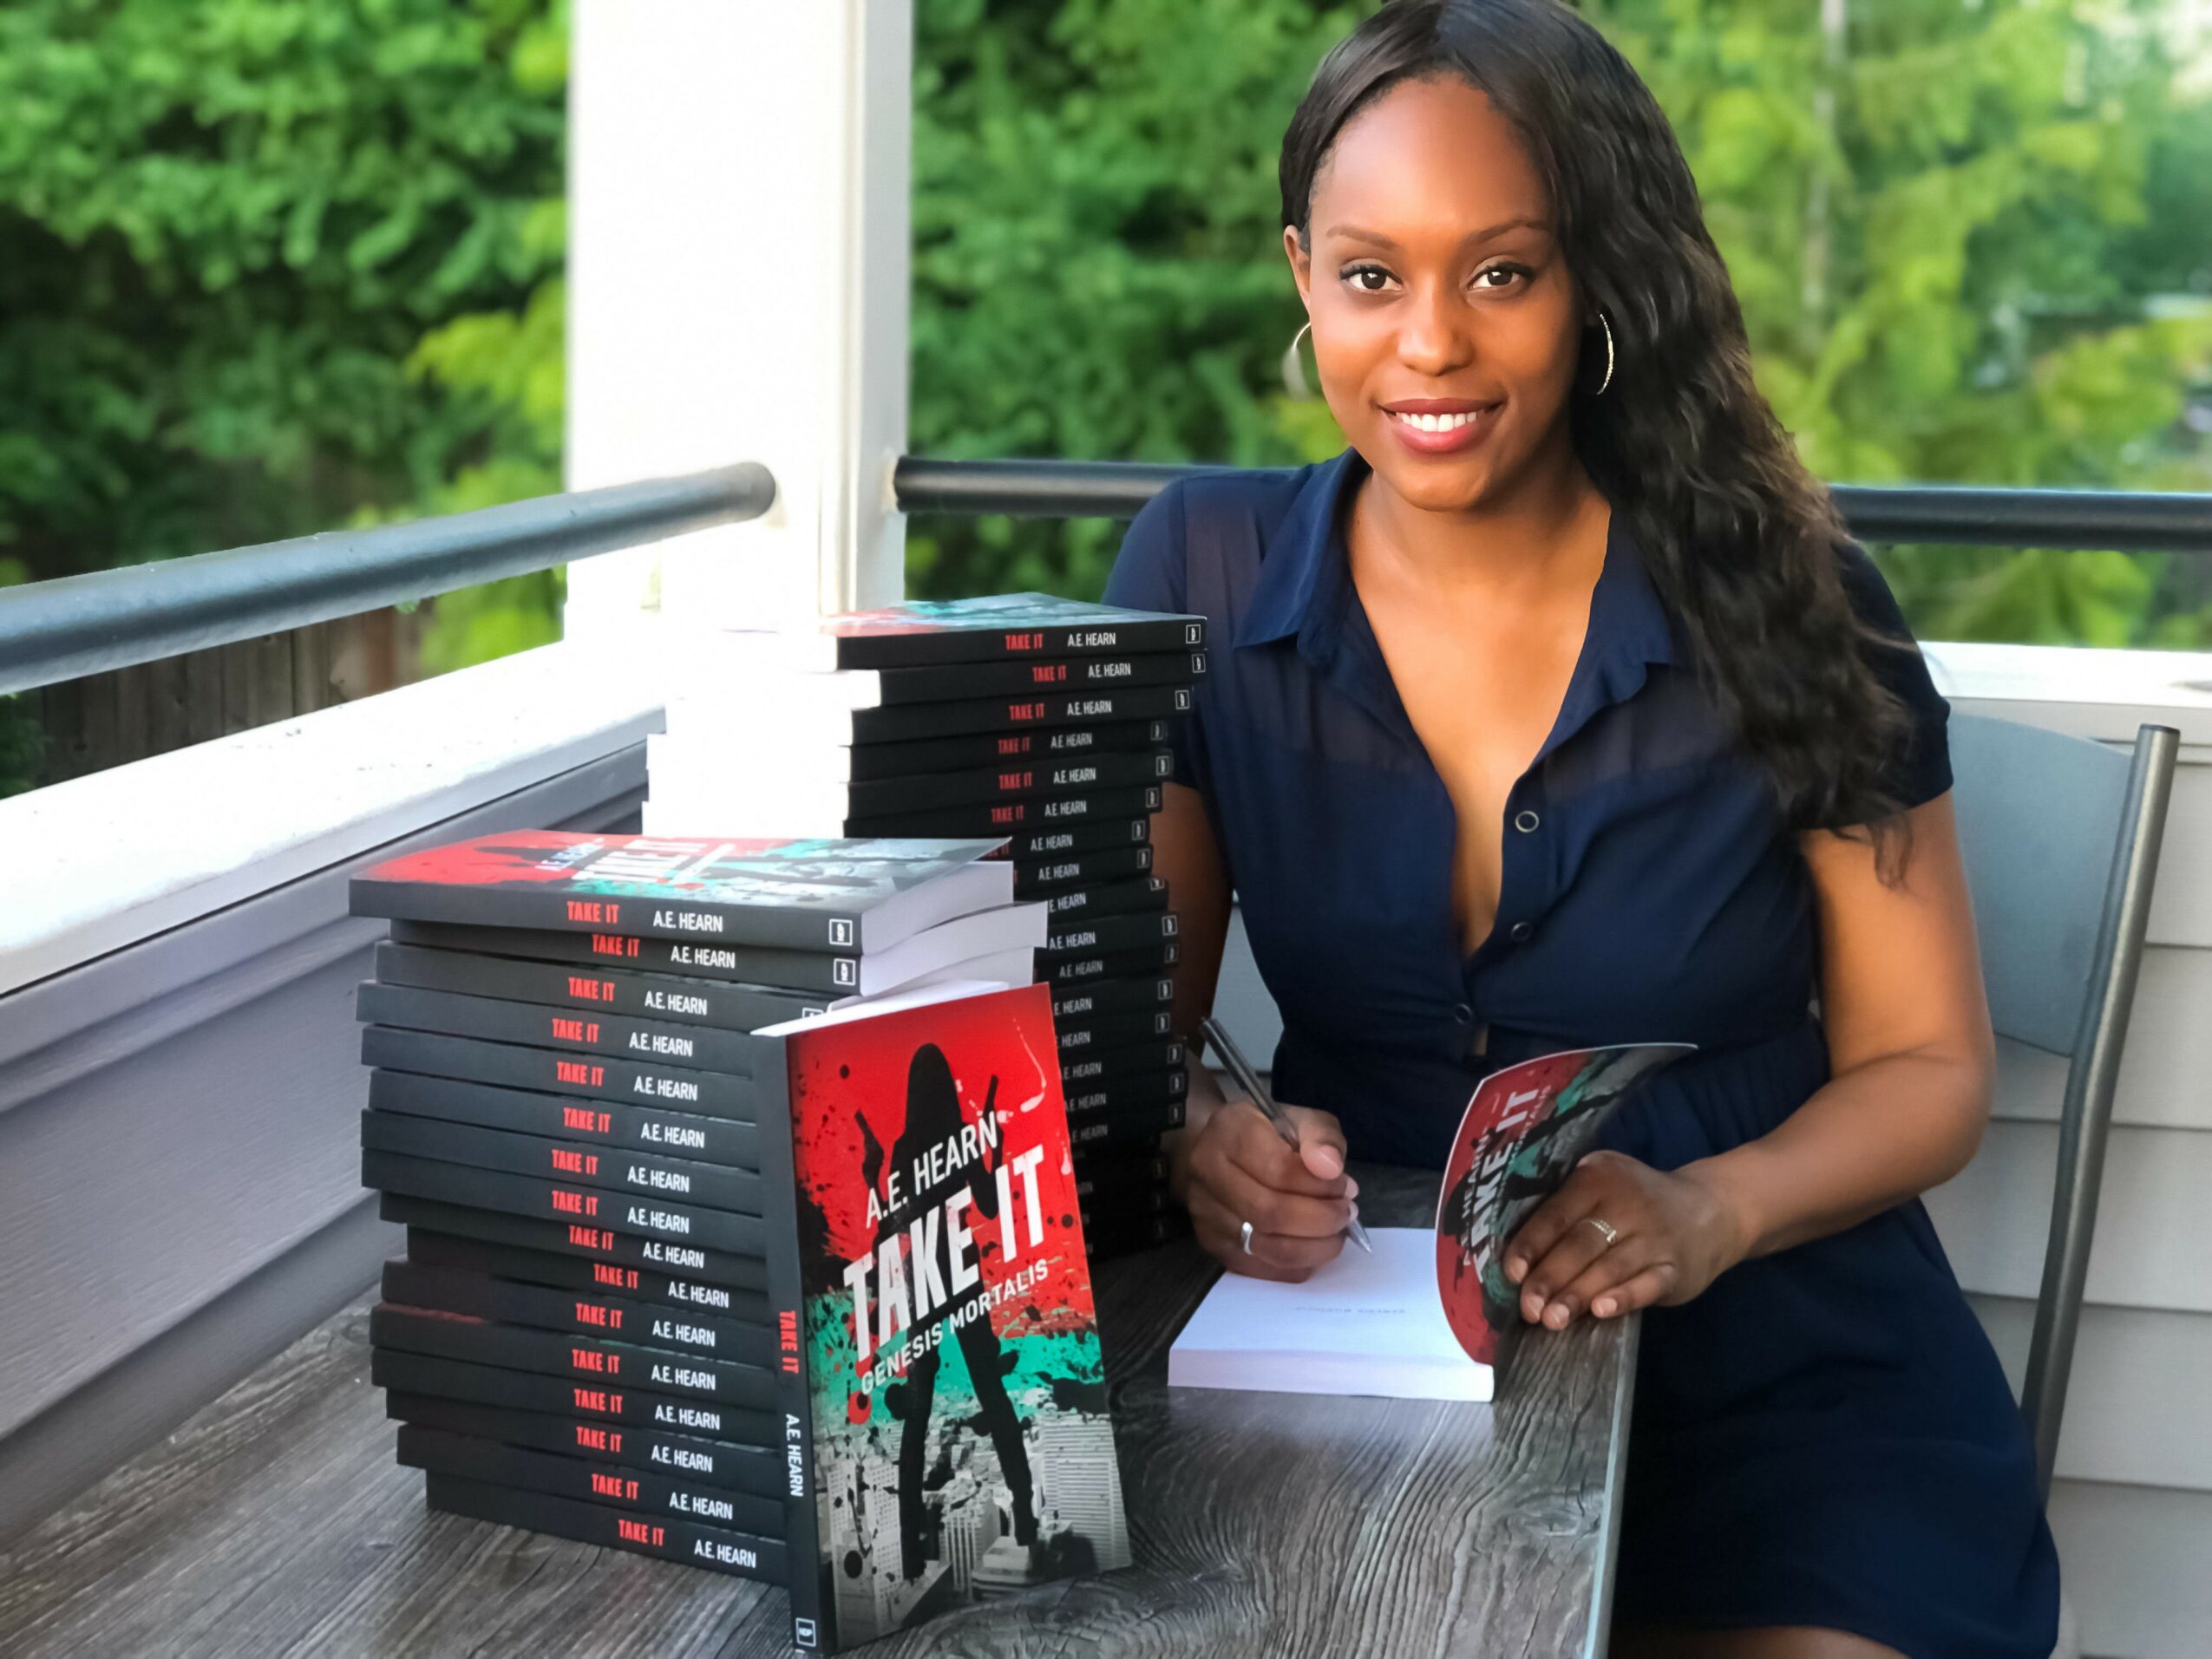 Author Ashlea Hearn, a '19 graduate, at her local book signing.